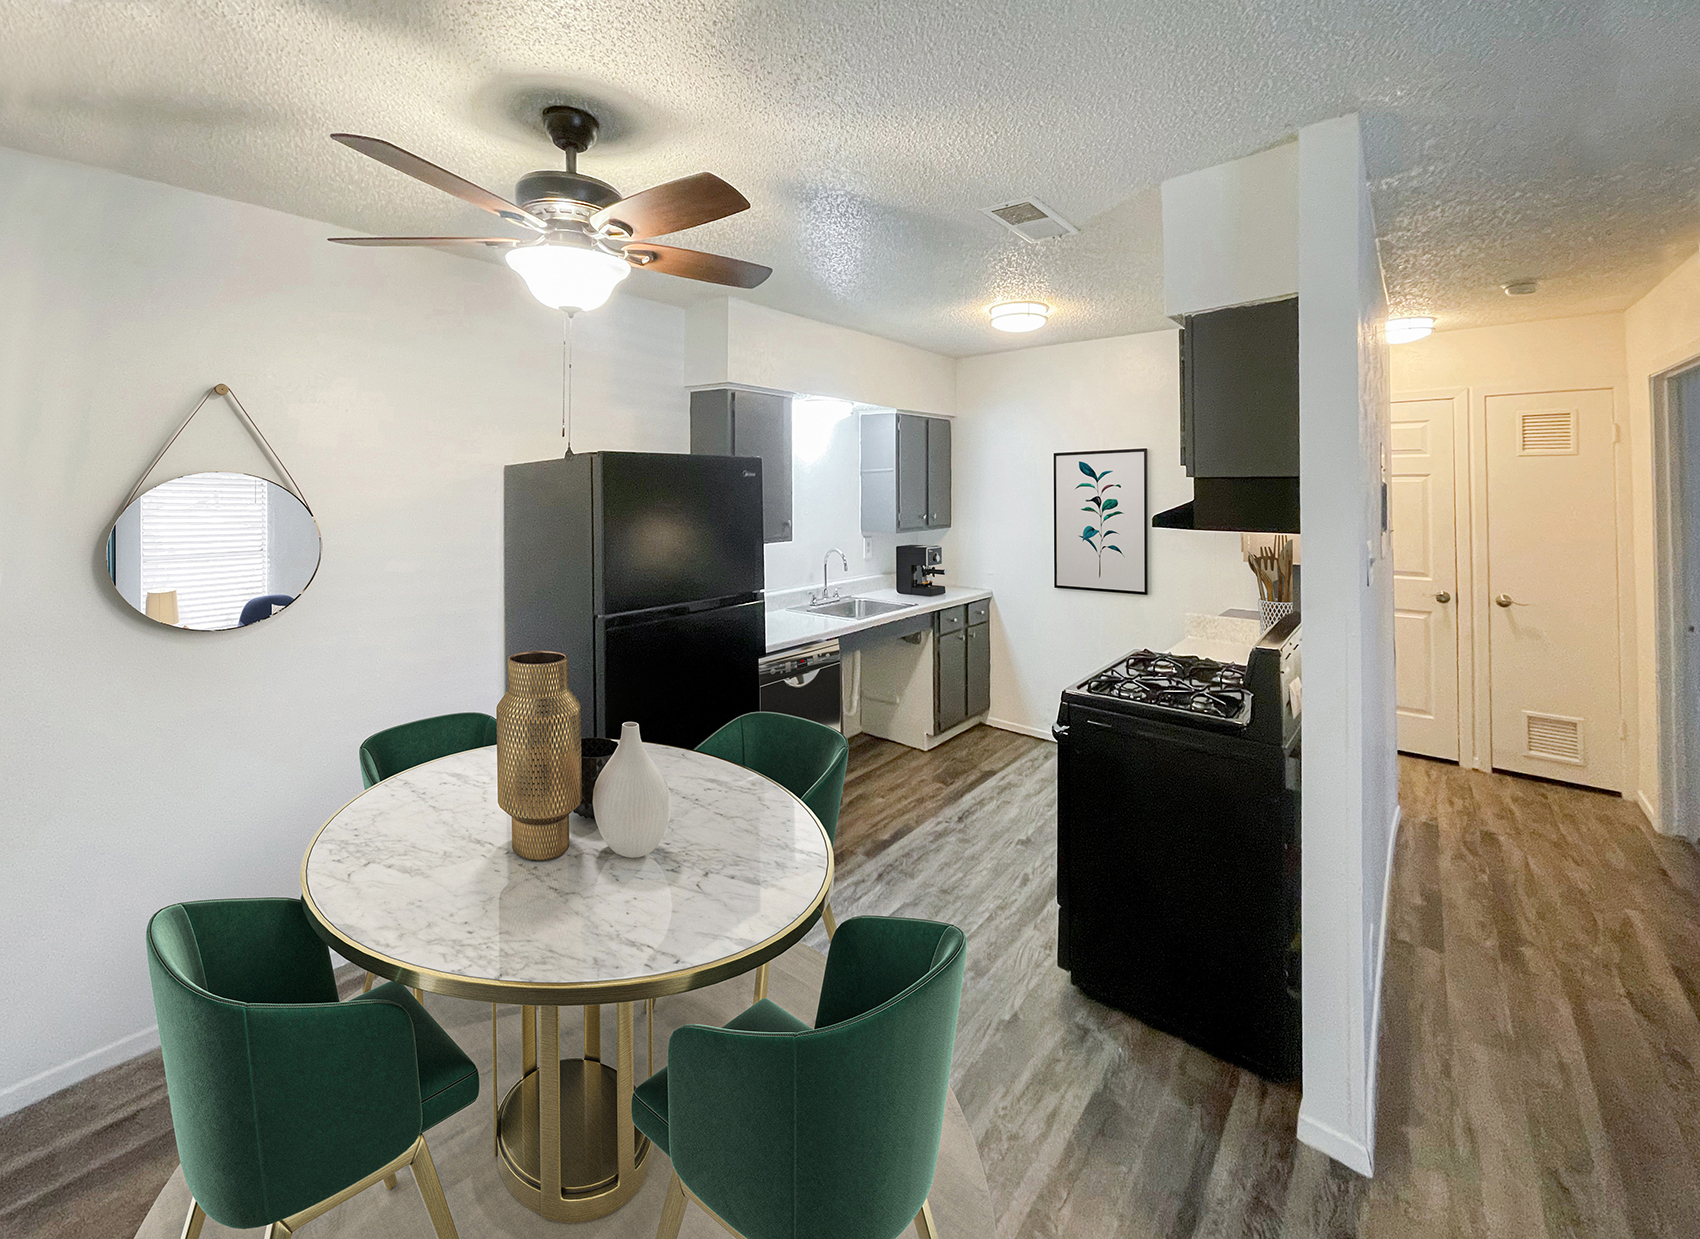 Fully Equipped Kitchen with a Separate Dining Area